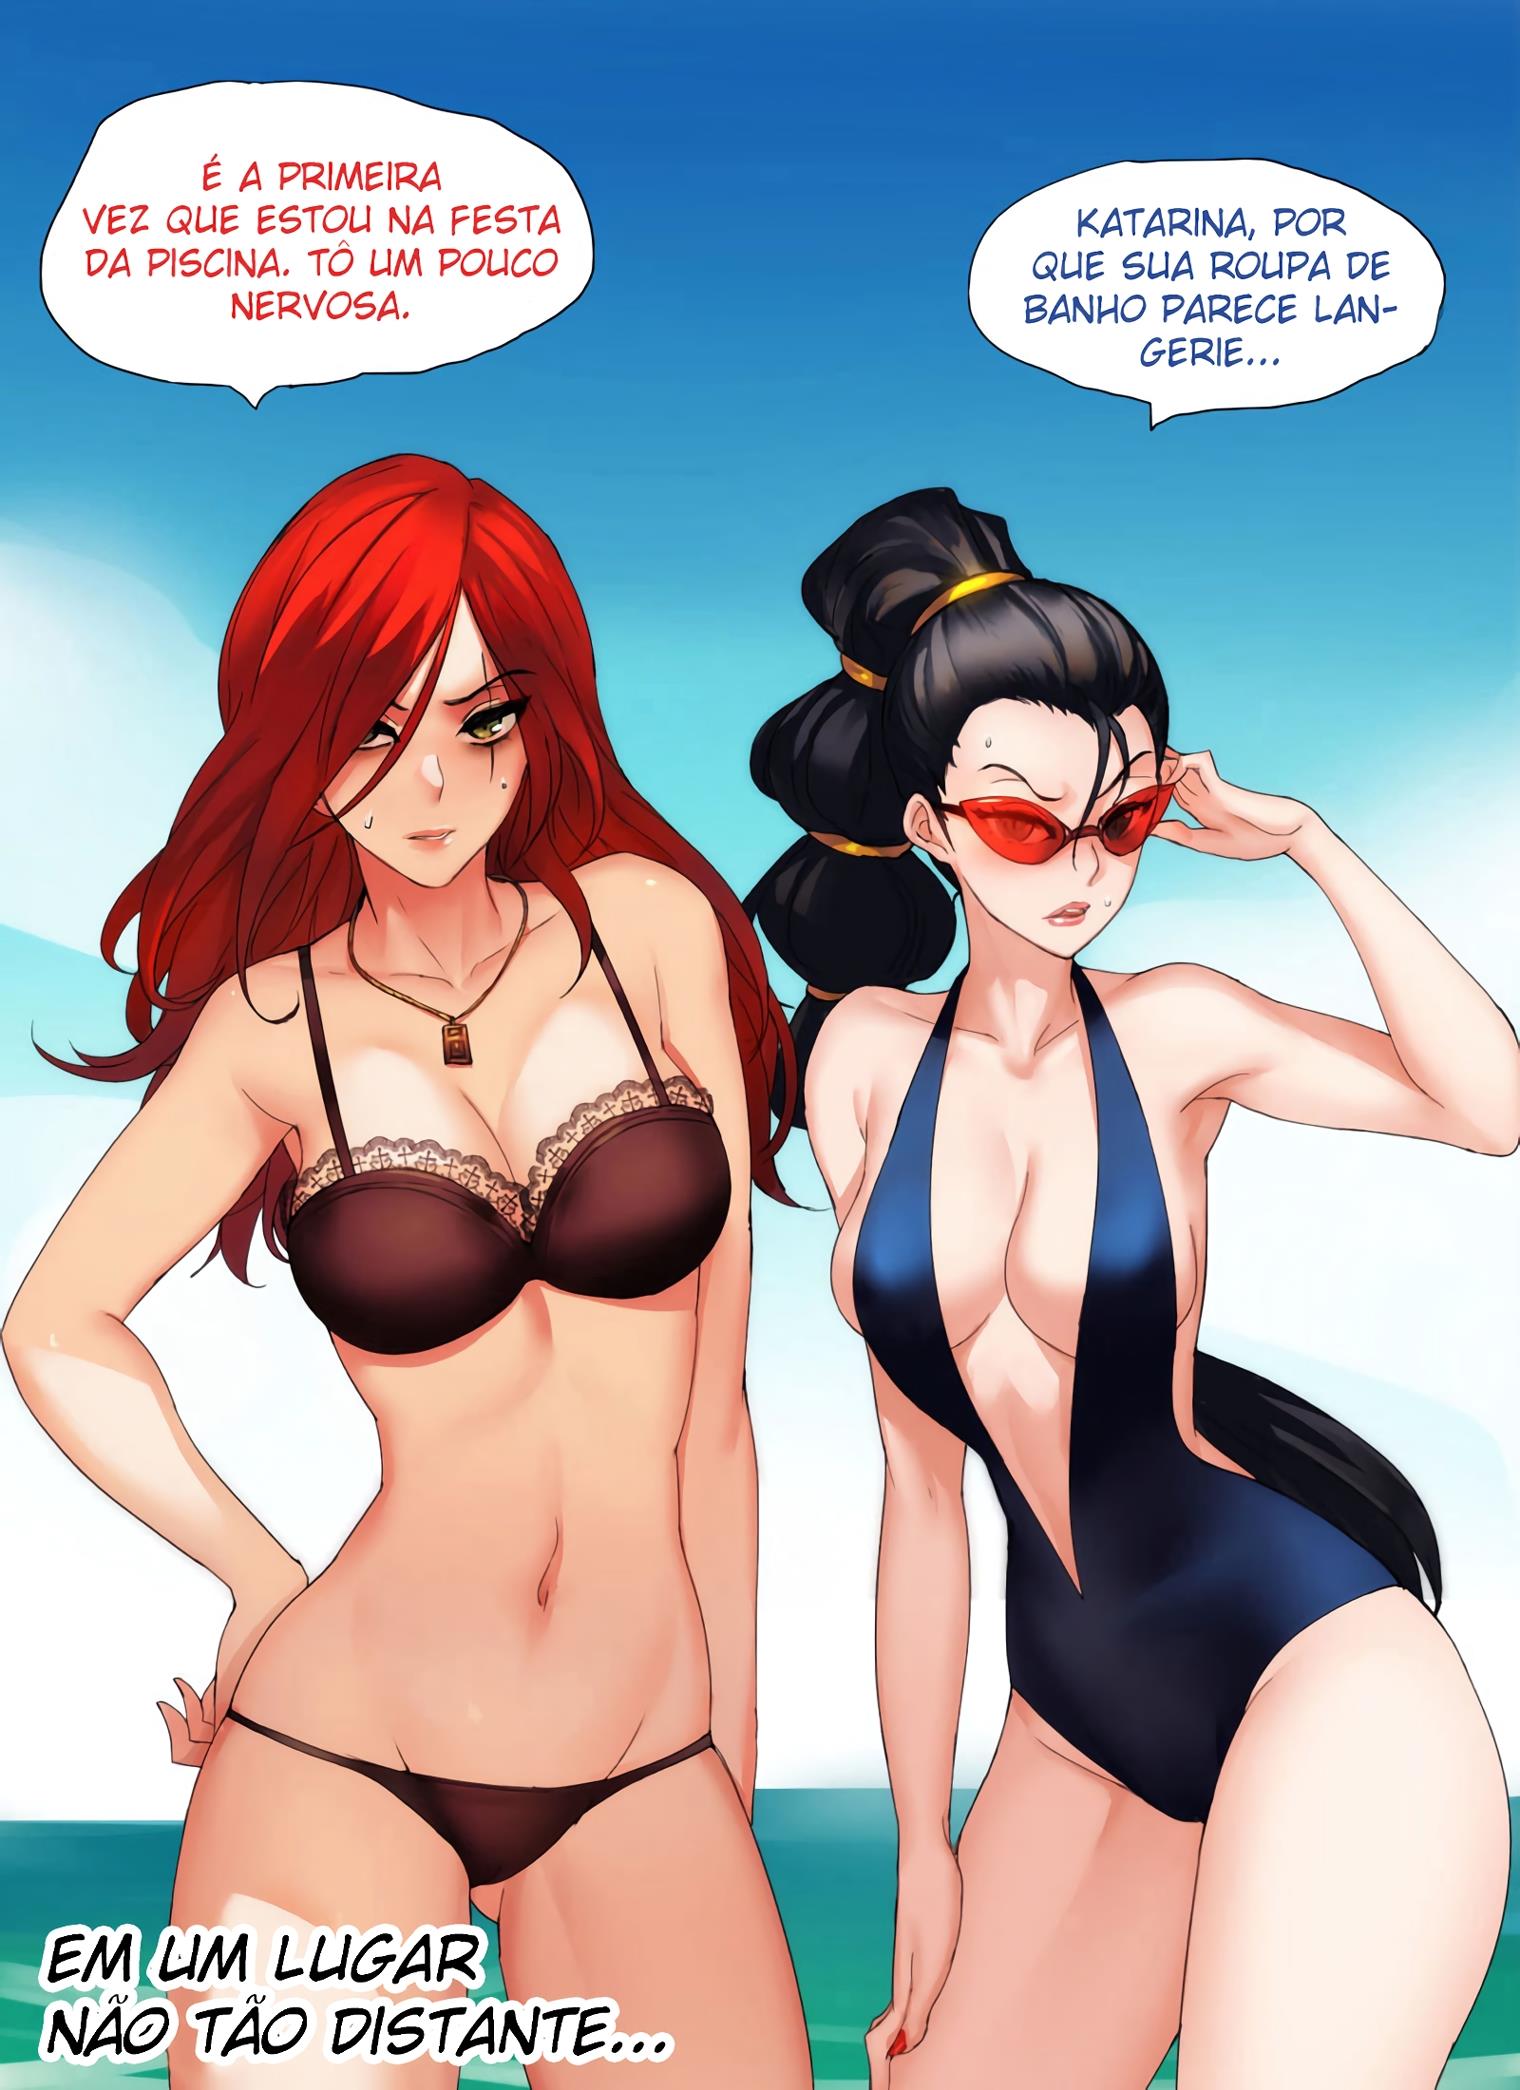 Pool Party - Summer in Summoners Rift